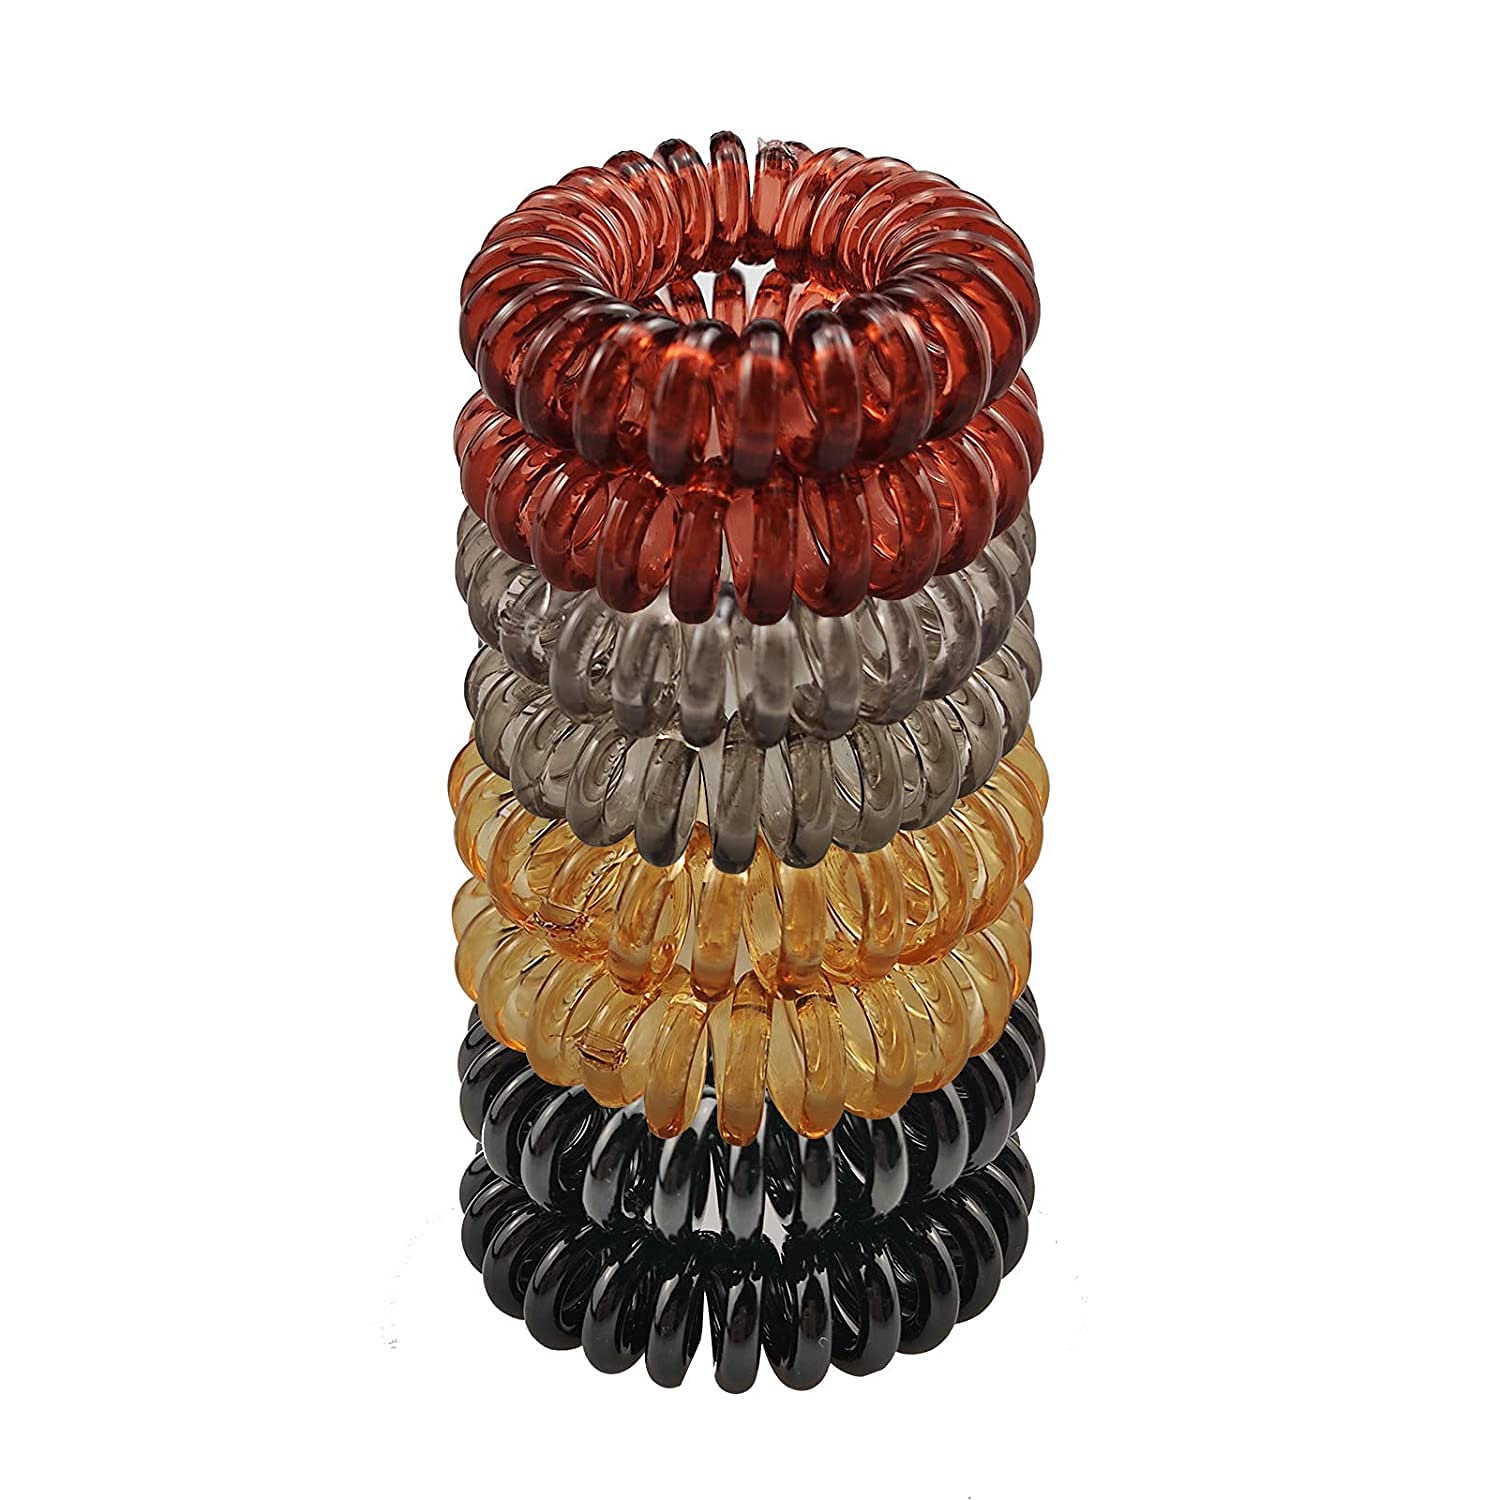 Spiral Hair Ties (8 Pieces), Coil Hair Ties for Thick Hair, Ponytail Holder Hair Ties for Women (four Colors), No Crease Hair Ties, Phone Cord Hair Ties for all Hair Types with Plastic Spiral. - image 1 of 7